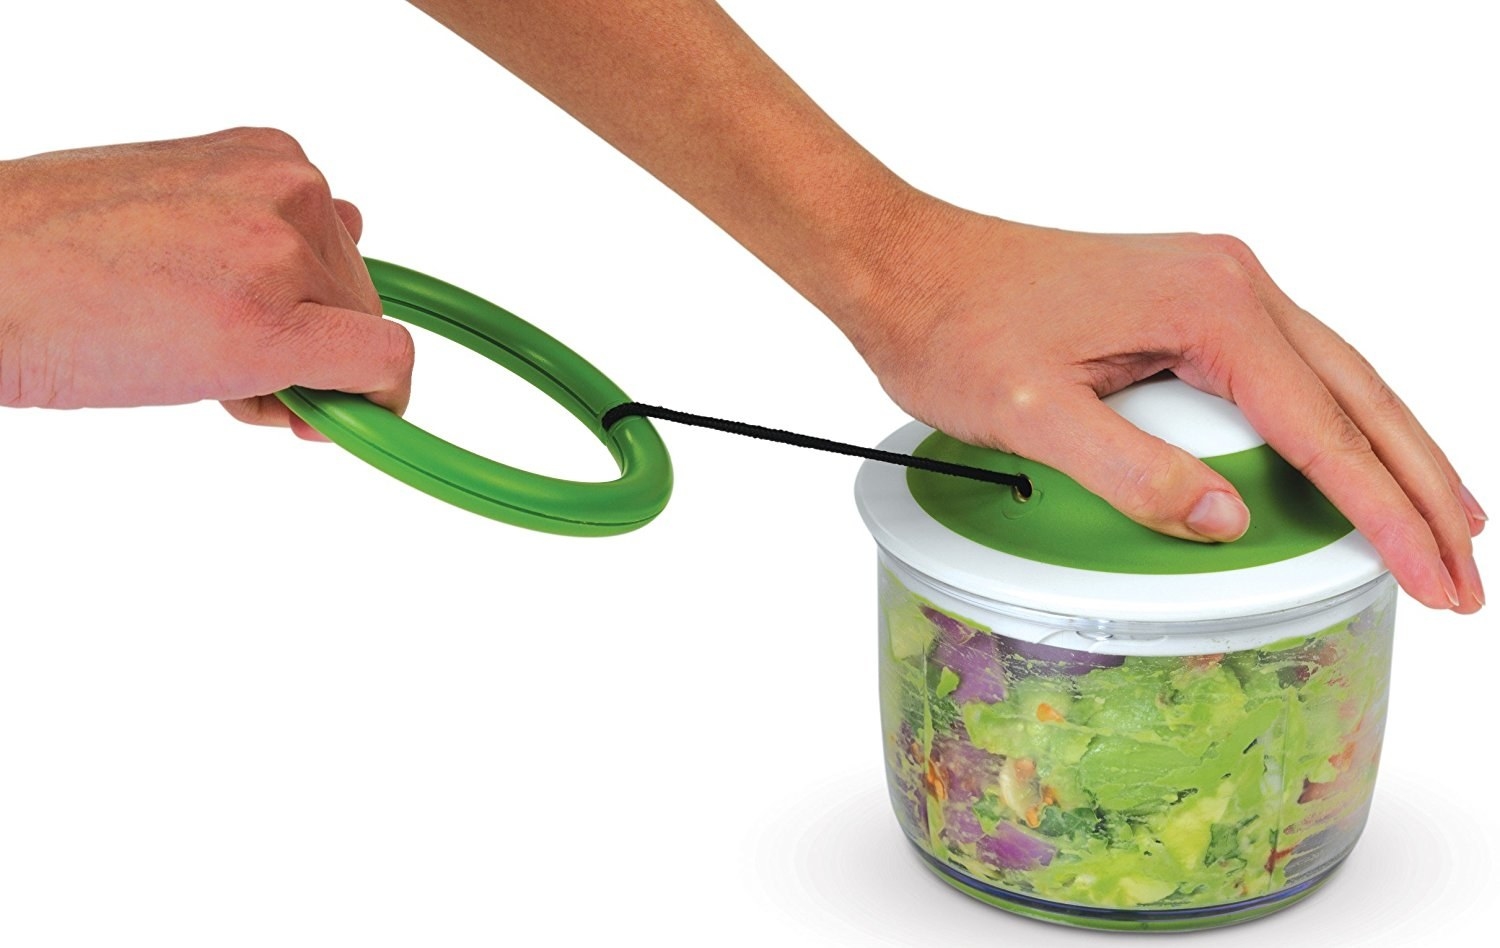 Someone using the green food chopper to slice leafy greens